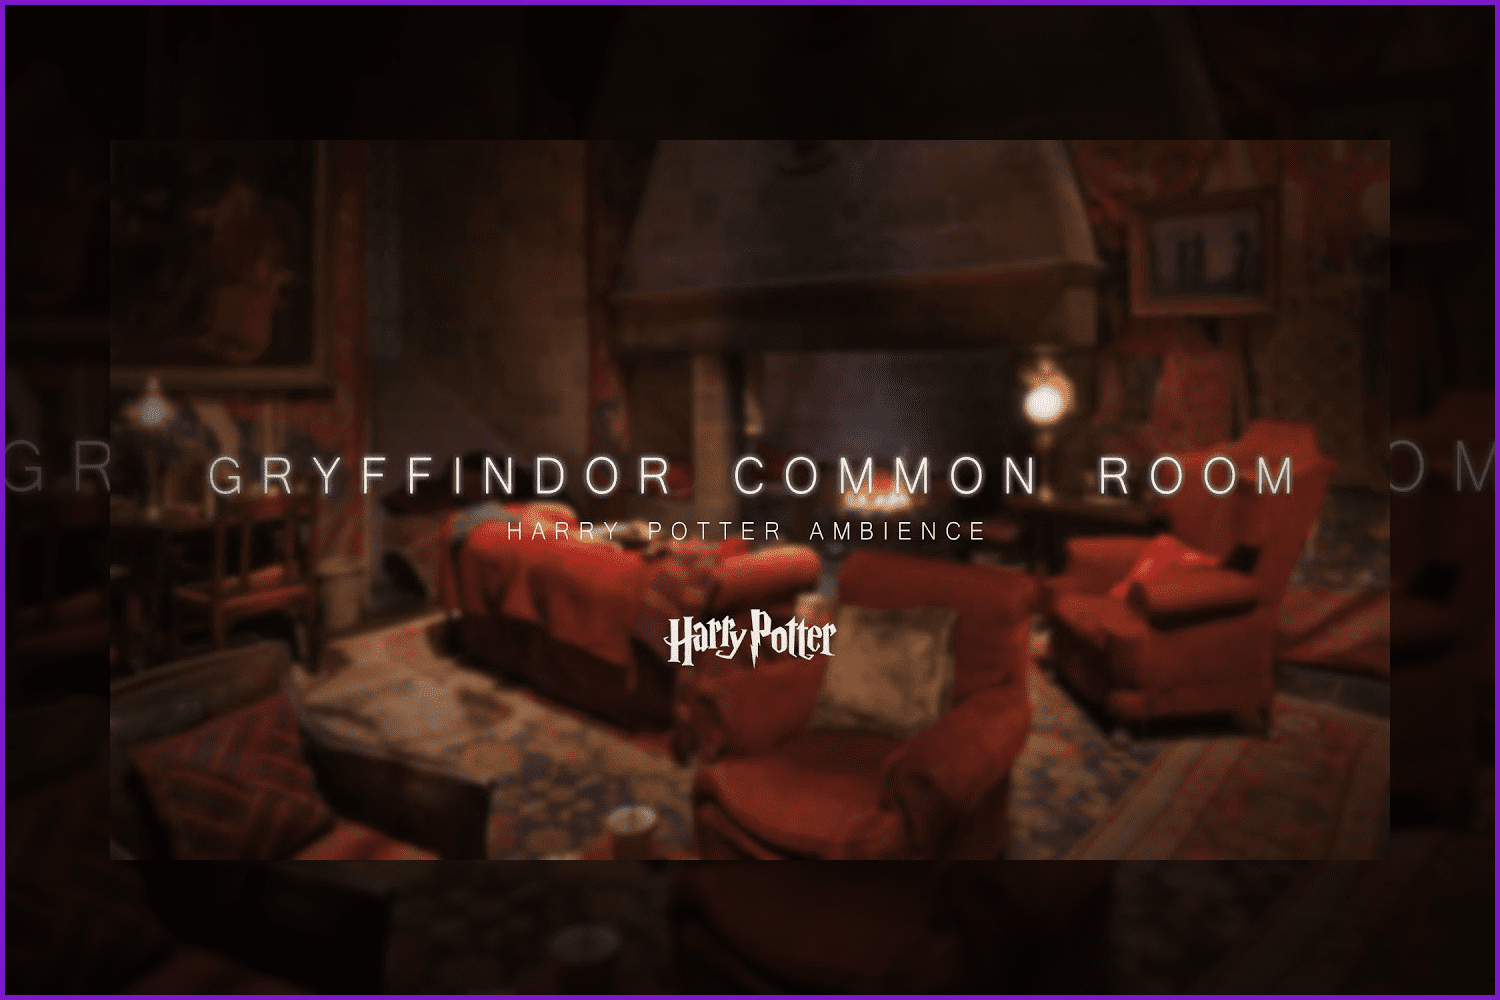 9 blur the background Gryffindor common room